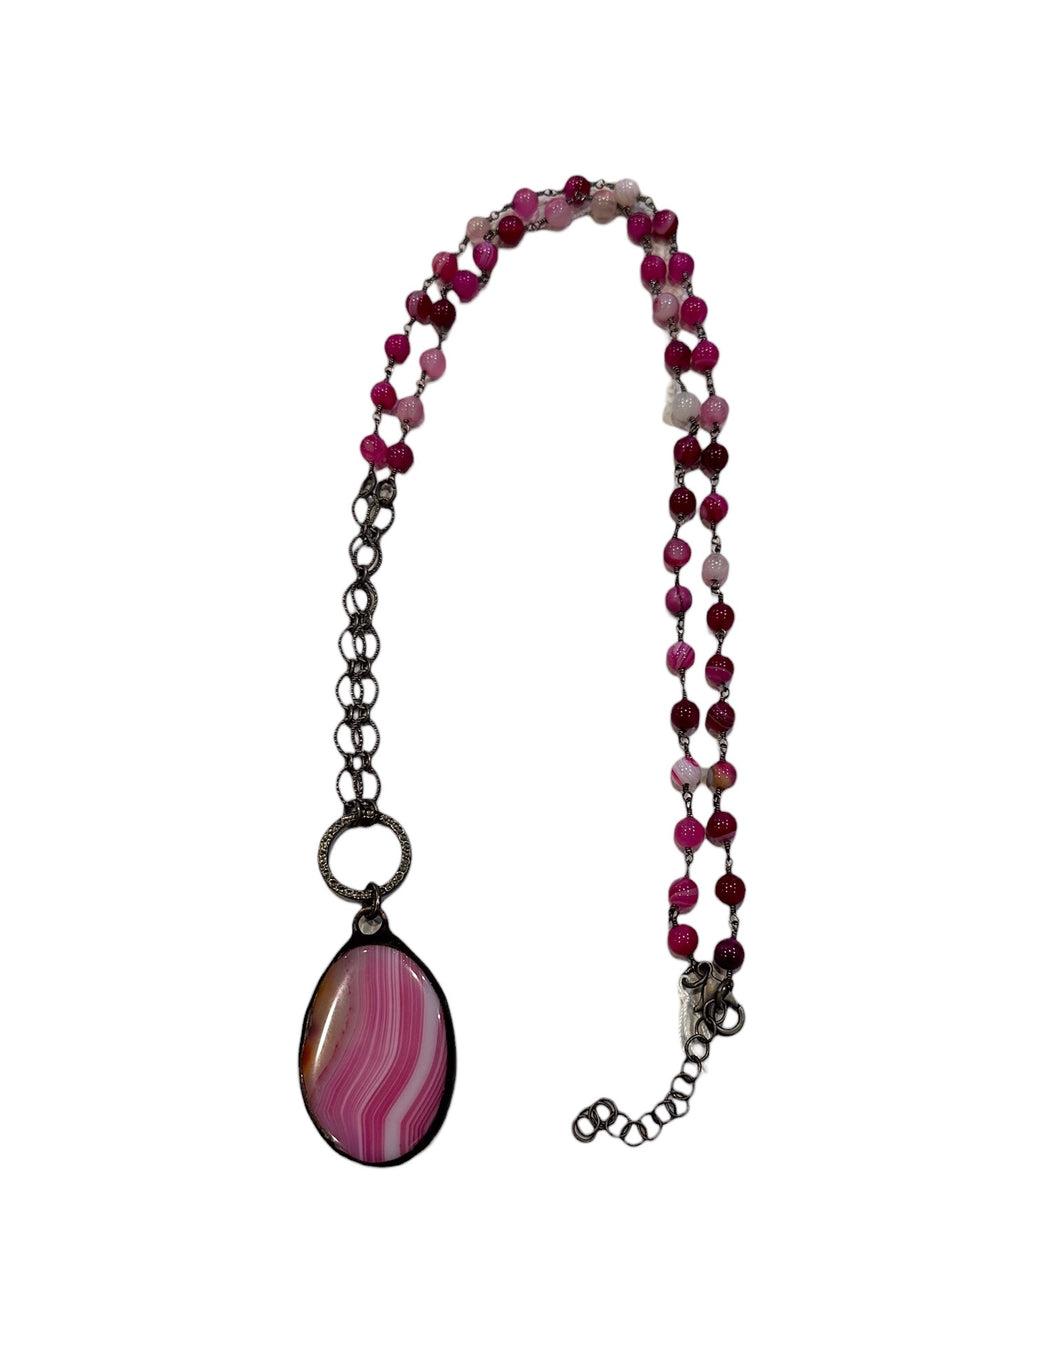 Long Necklace with Fuchsia Agate Pendant